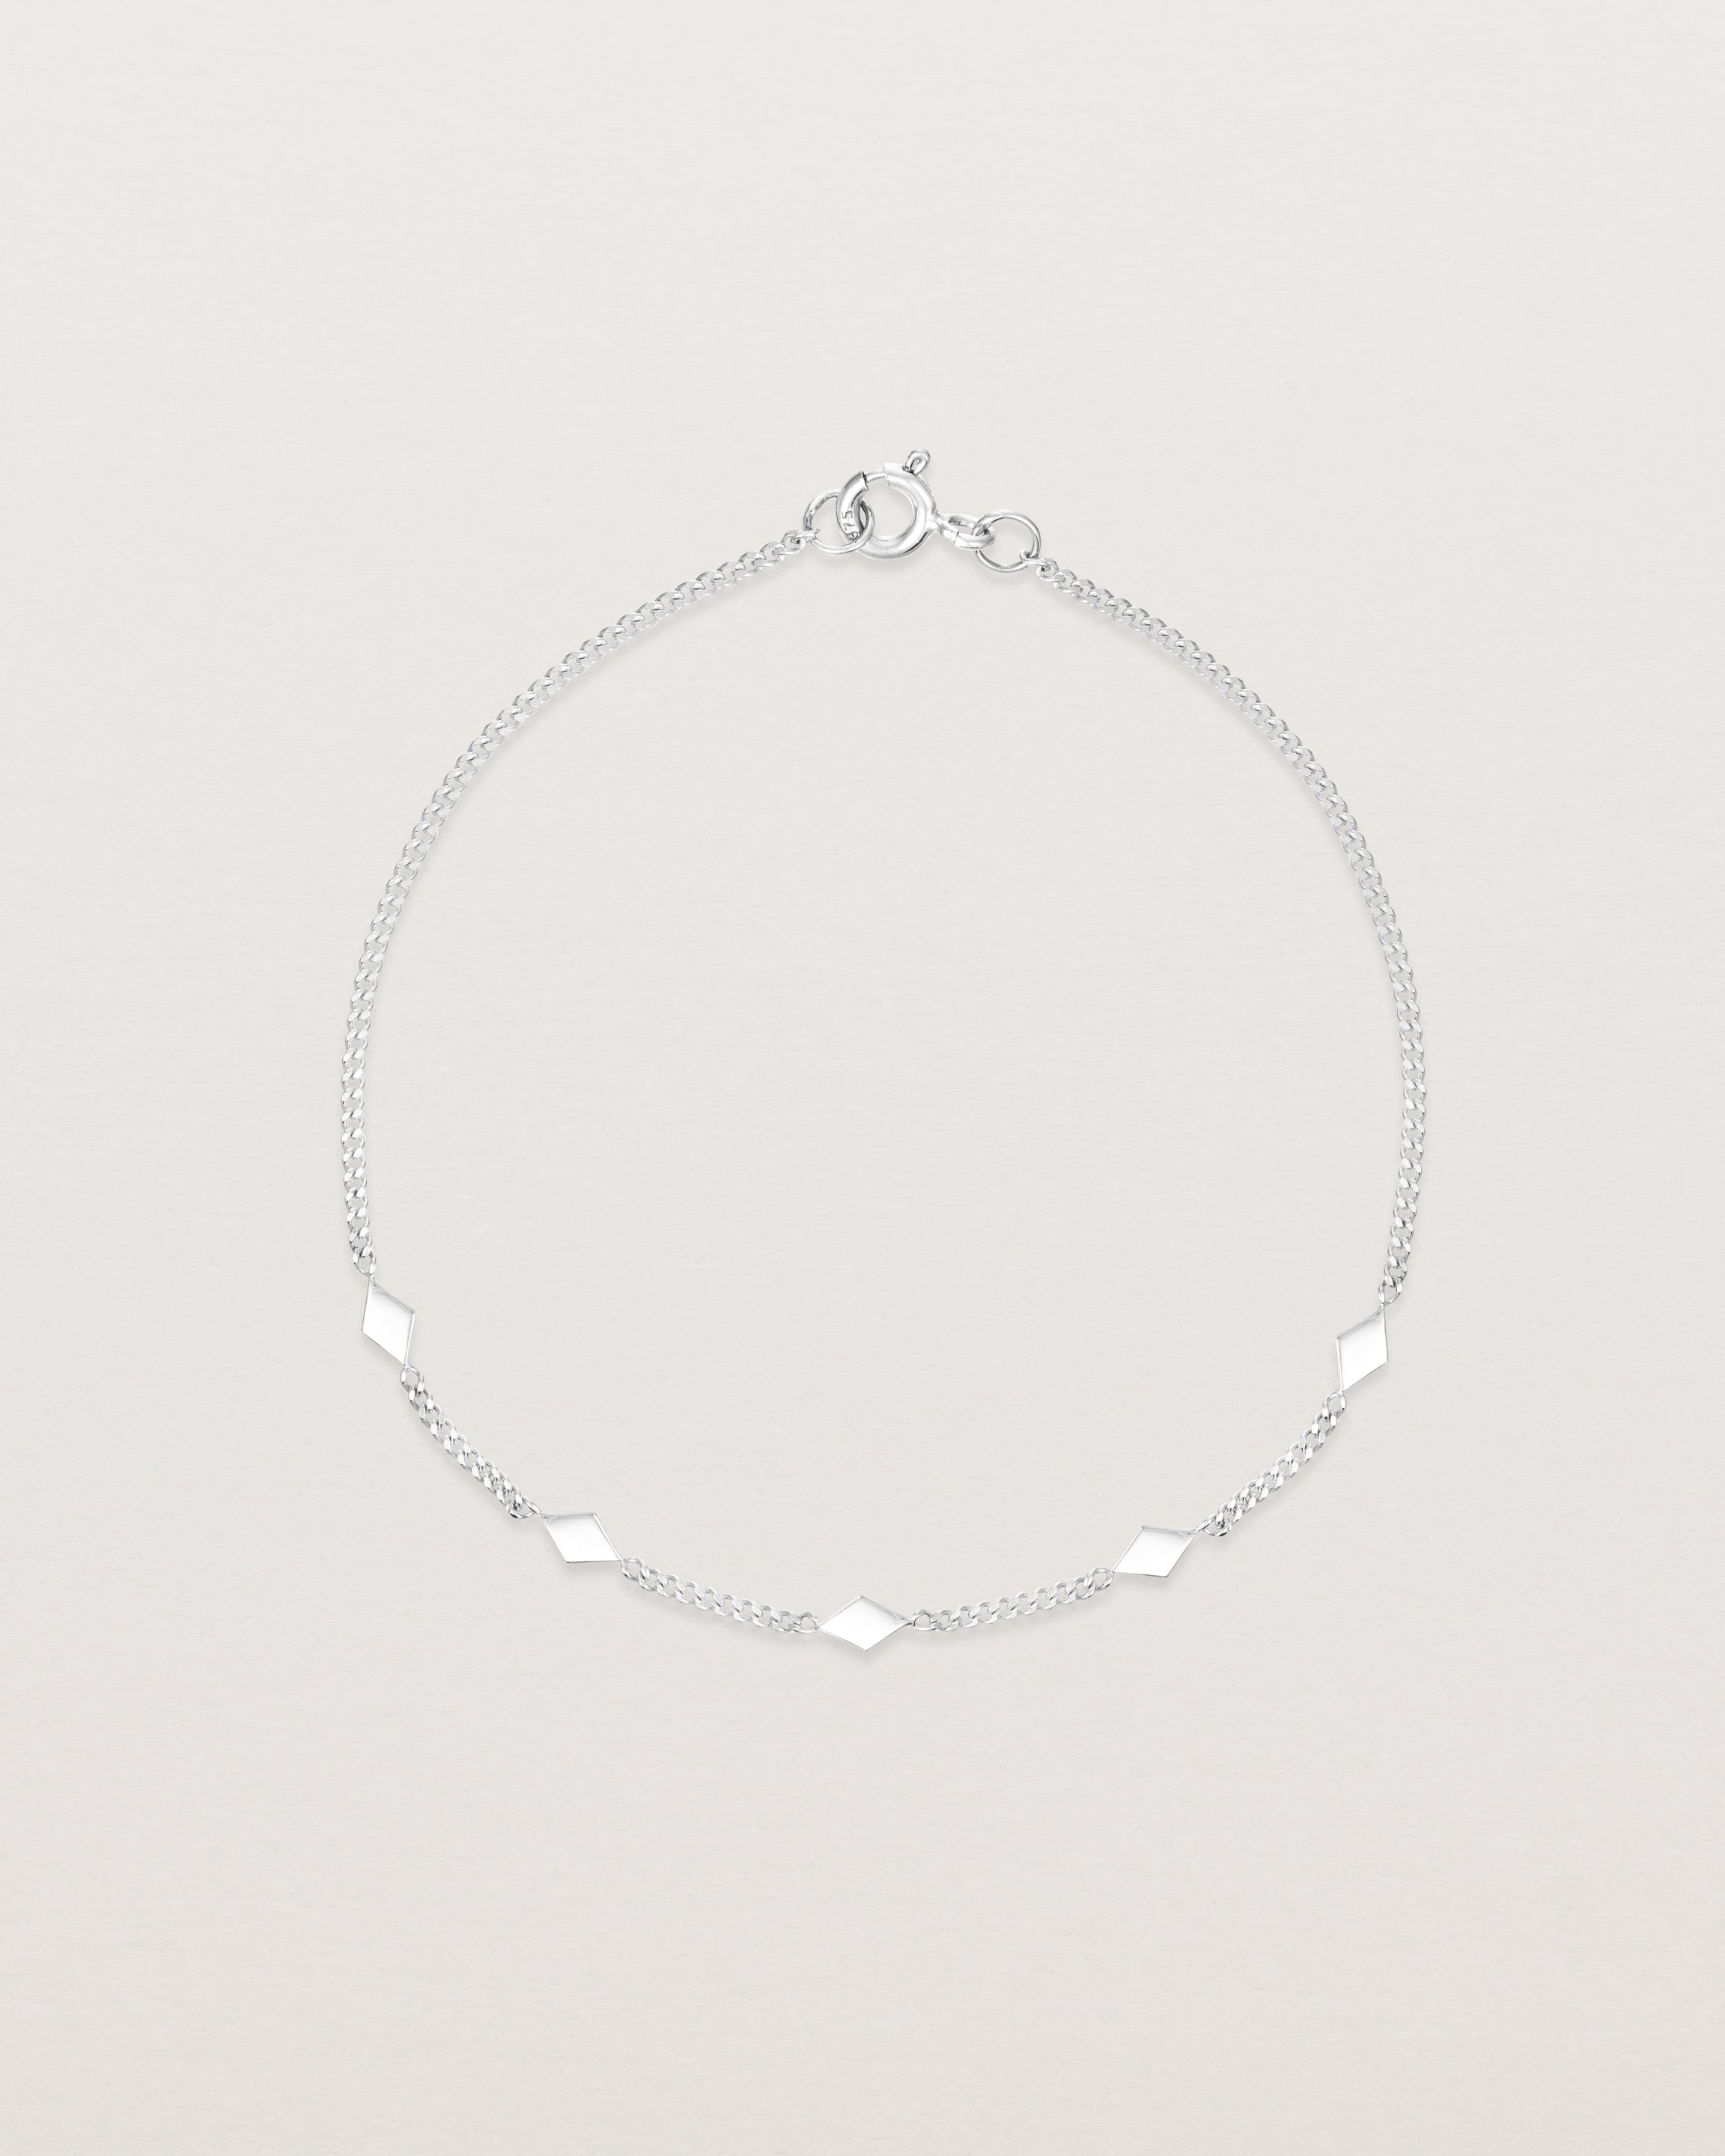 Top down view of the Nuna Charm Bracelet in Sterling Silver.